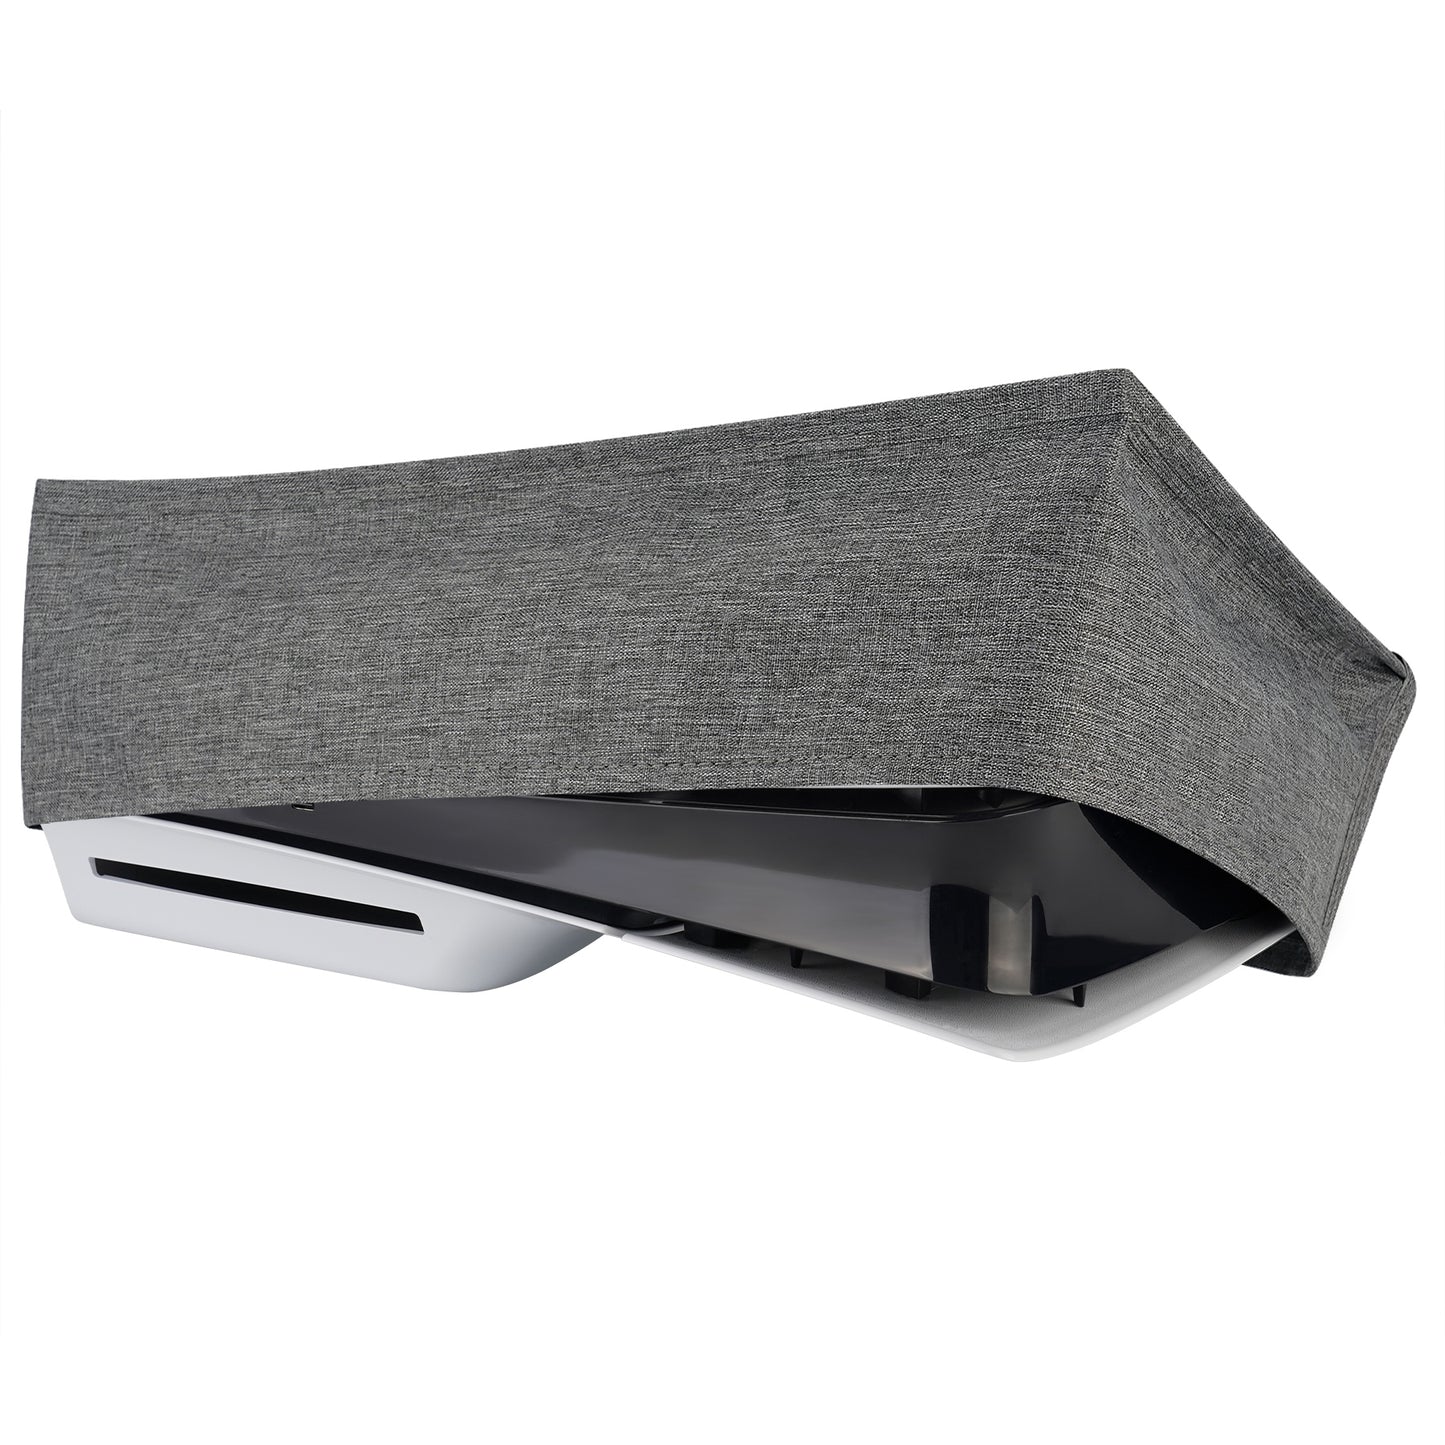 PlayVital Horizontal Dust Cover for ps5 Slim Disc Edition(The New Smaller Design), Nylon Dust Proof Protector Waterproof Cover Sleeve for ps5 Slim Console - Gray - HUYPFM002 PlayVital